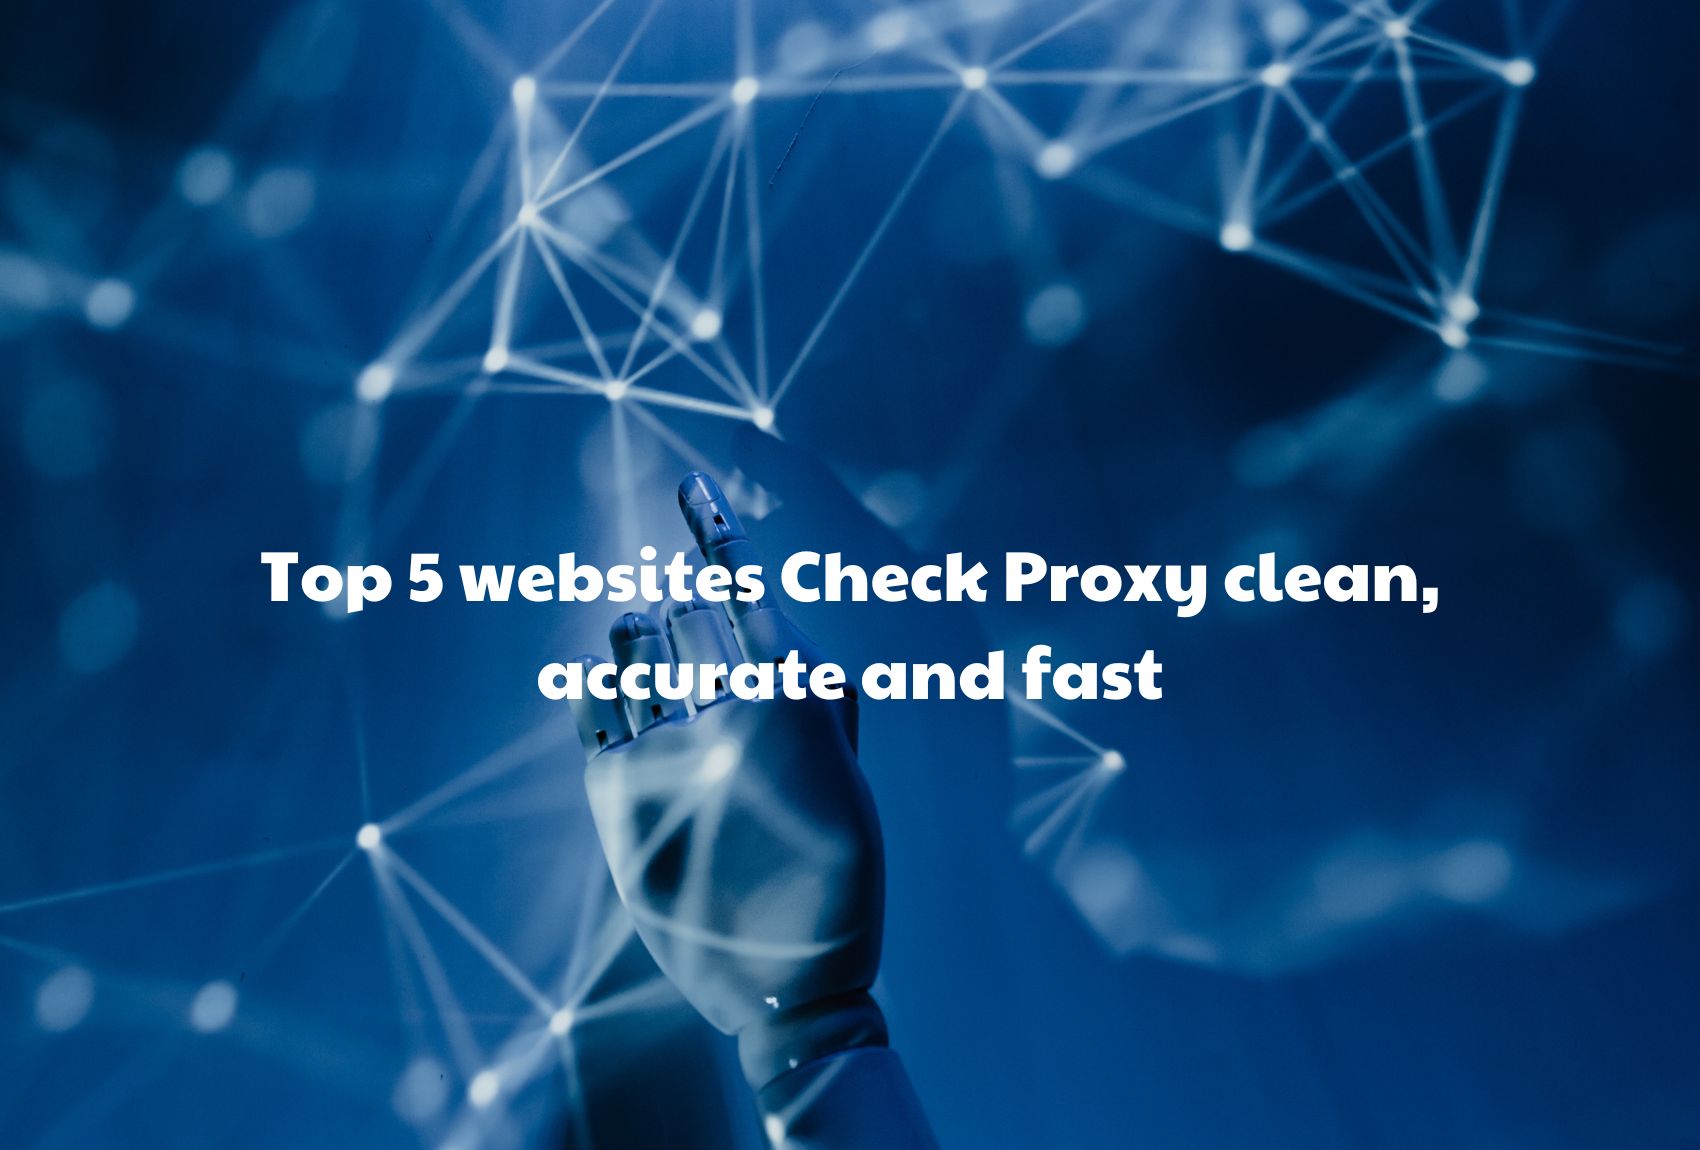 Top 5 websites Check Proxy clean, accurate and fast